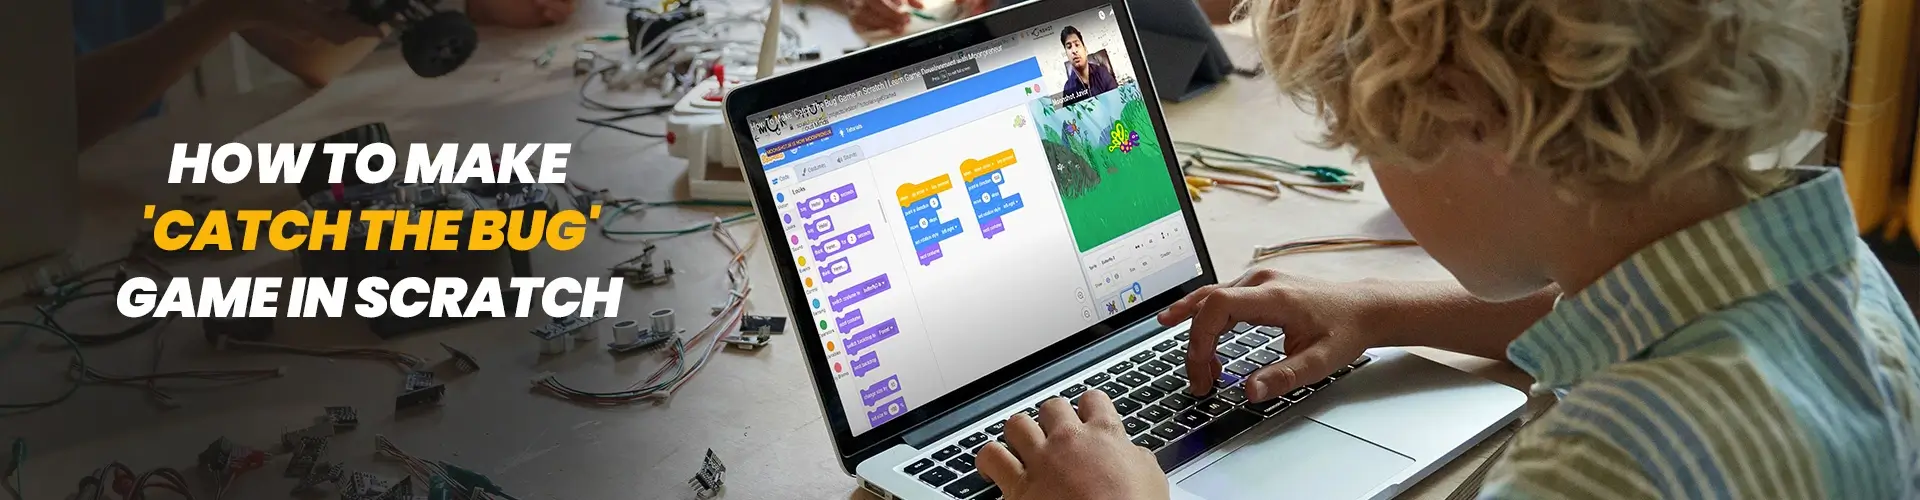 How To Make 'Catch The Bug' Game in Scratch